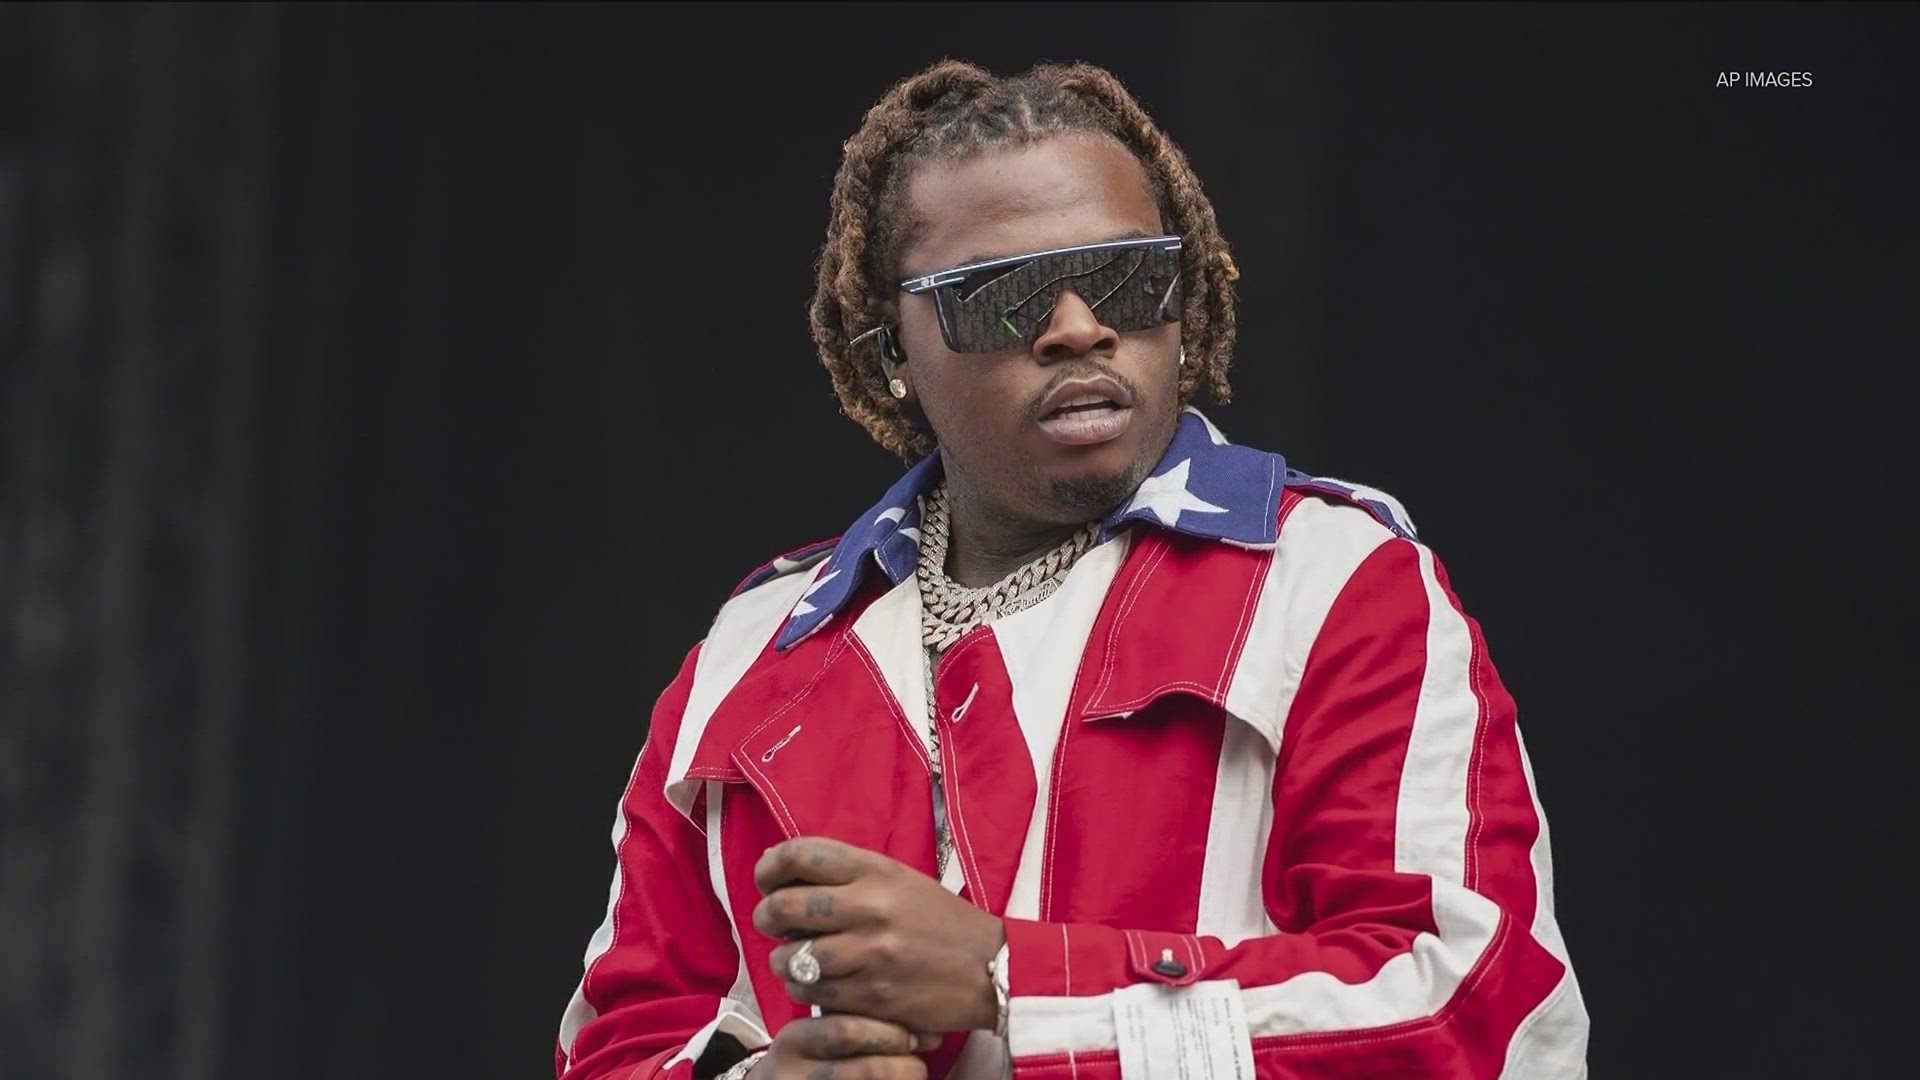 Atlanta rapper Gunna is speaking out after years of scrutiny after accepting a plea deal in the ongoing RICO case against Young Thug and the alleged YSL street gang.